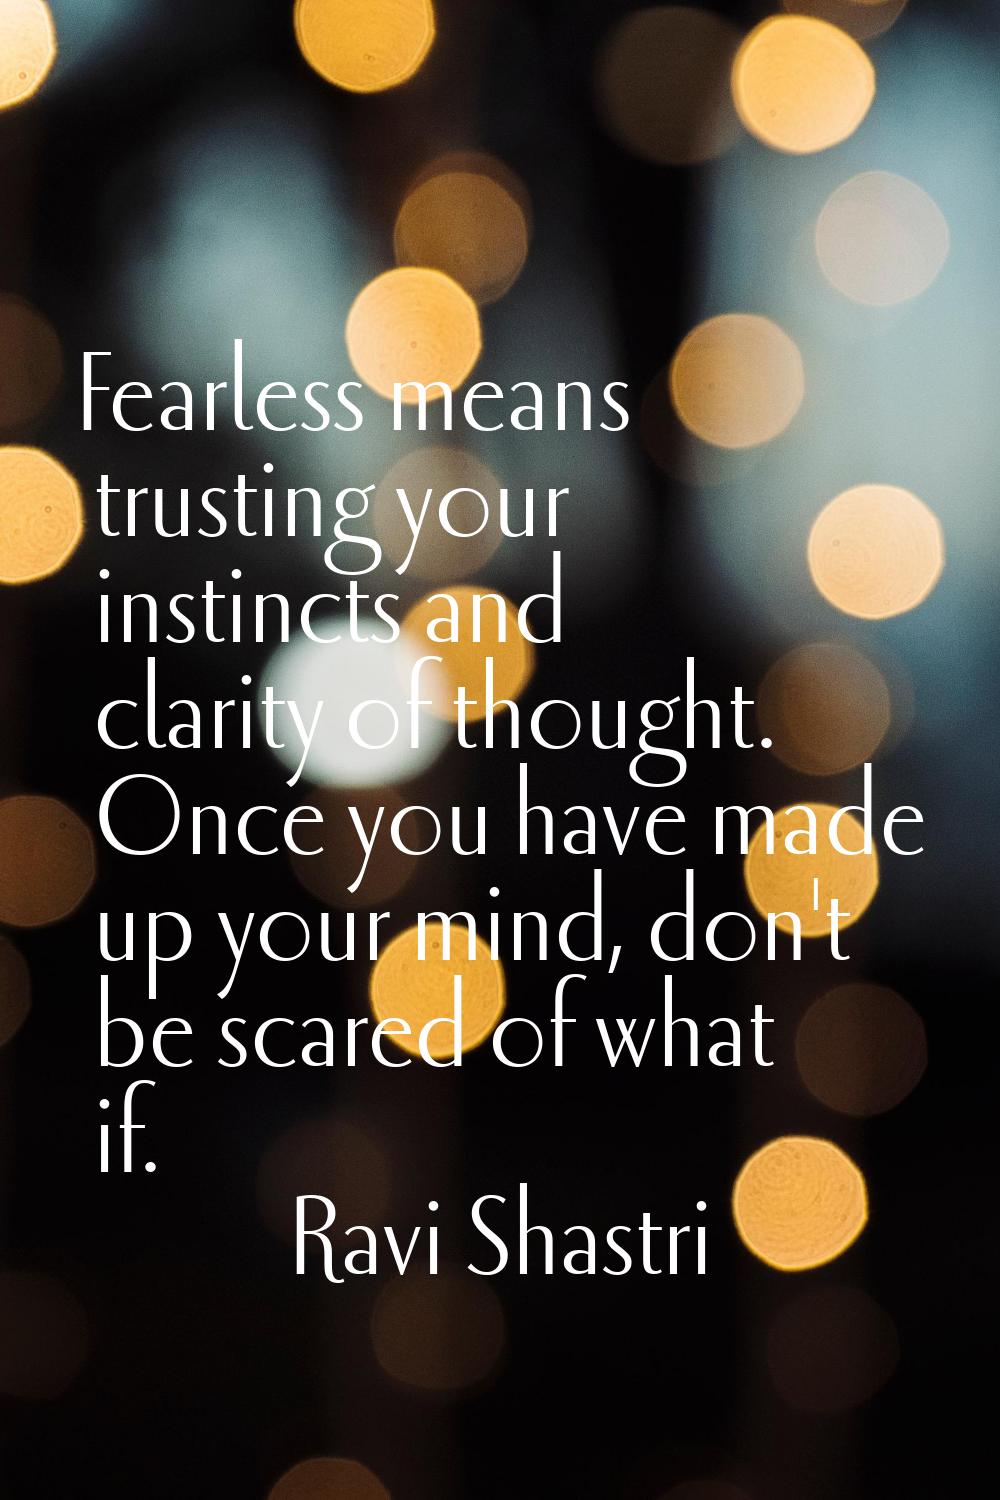 Fearless means trusting your instincts and clarity of thought. Once you have made up your mind, don